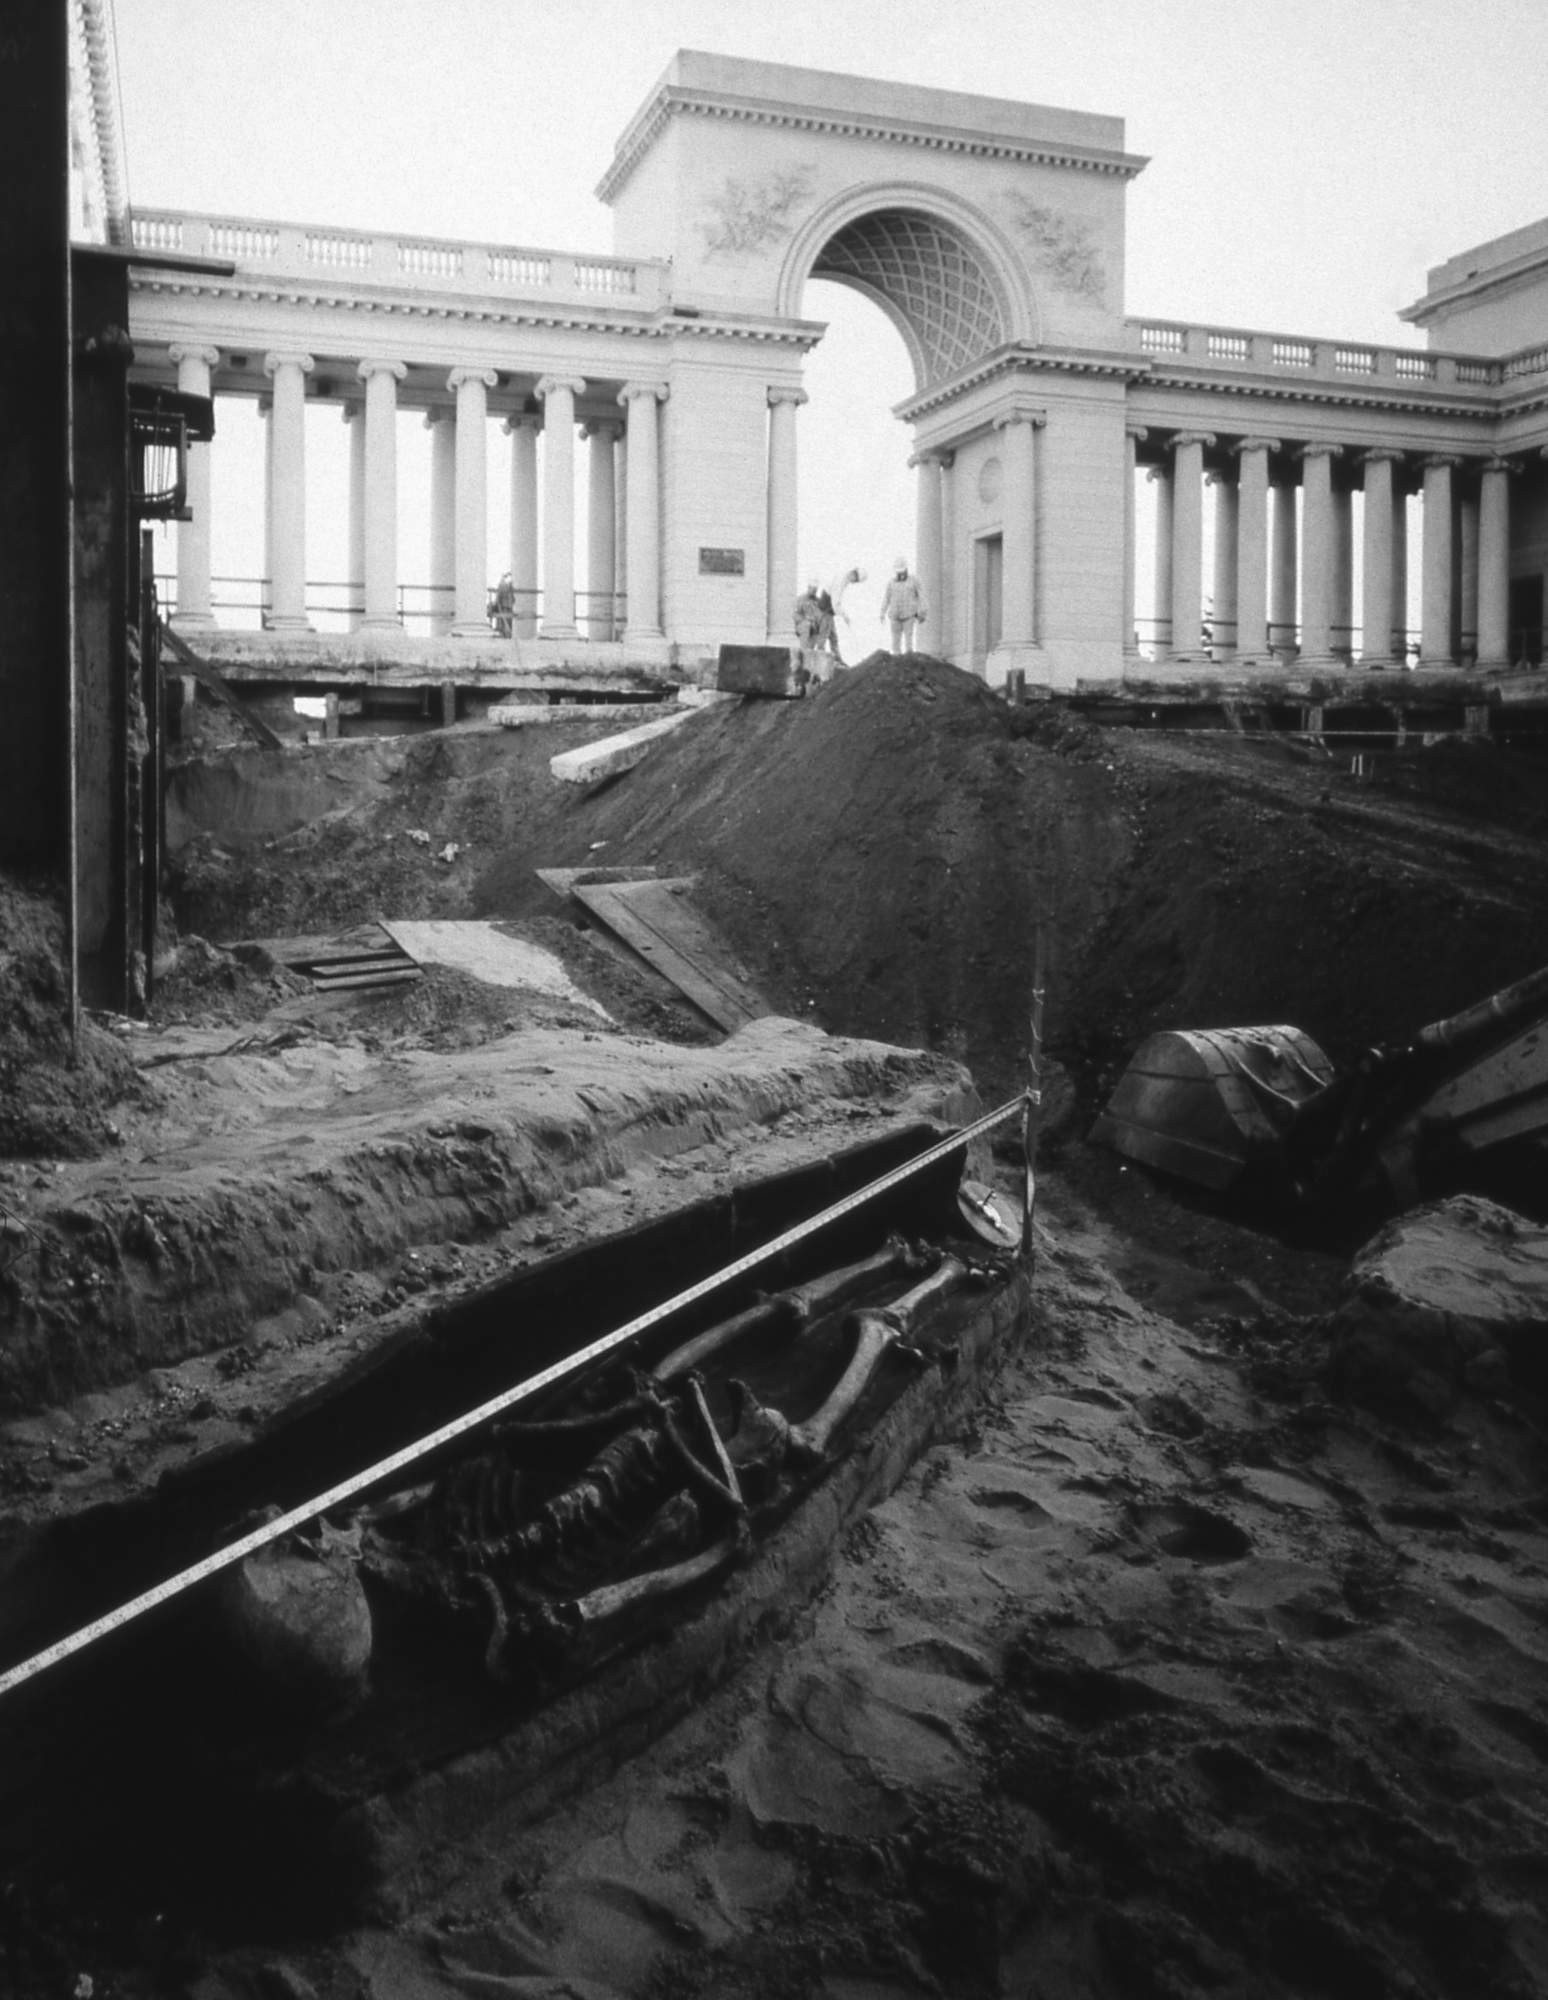  Burial, Angled With Backhoe, 1994 